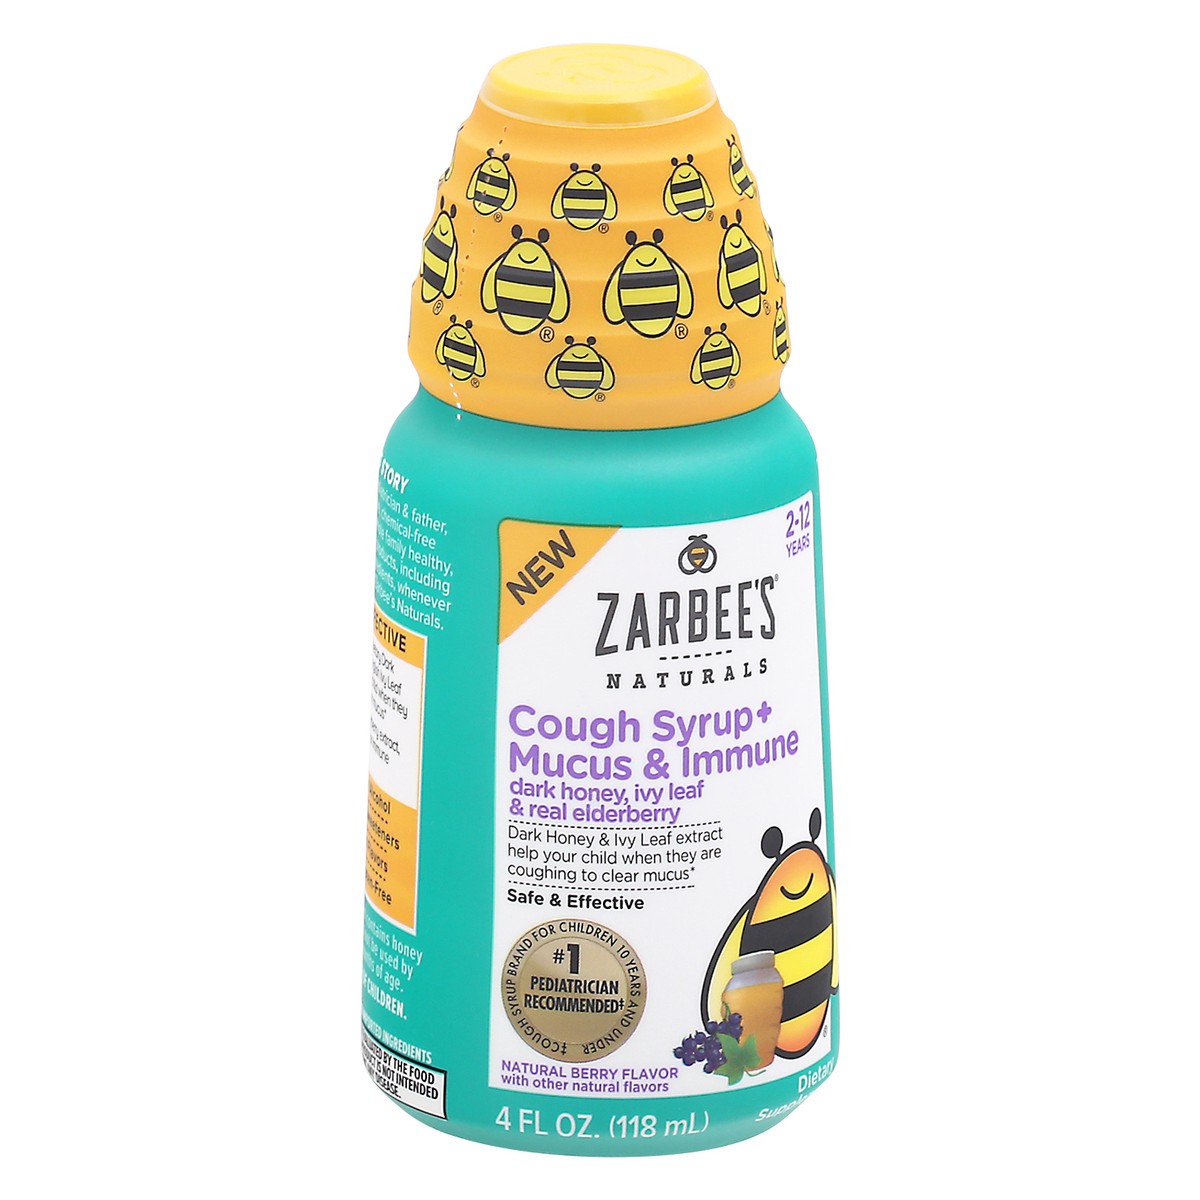 slide 2 of 9, Zarbee's Naturals Naturals 2-12 Years Natural Berry Flavor Cough Syrup + Mucus & Immune 4 fl oz Bottle, 4 fl oz